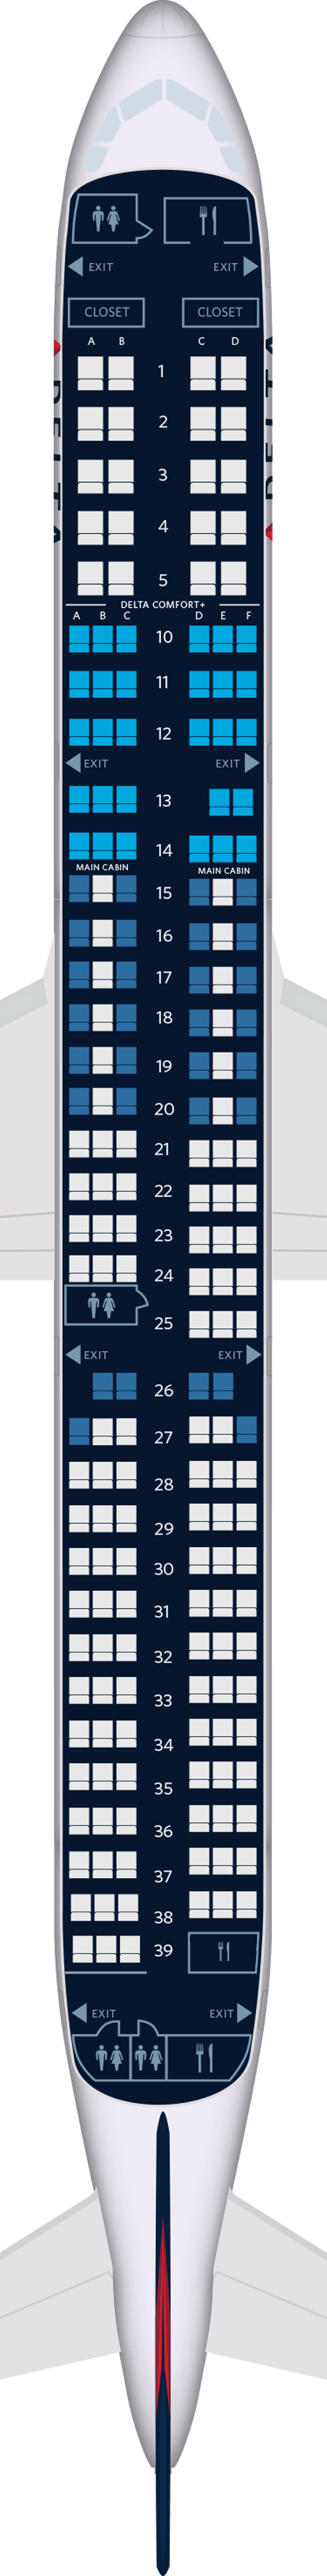 Airbus A321-200 Seat Maps, Specs & Amenities | Delta Air Lines